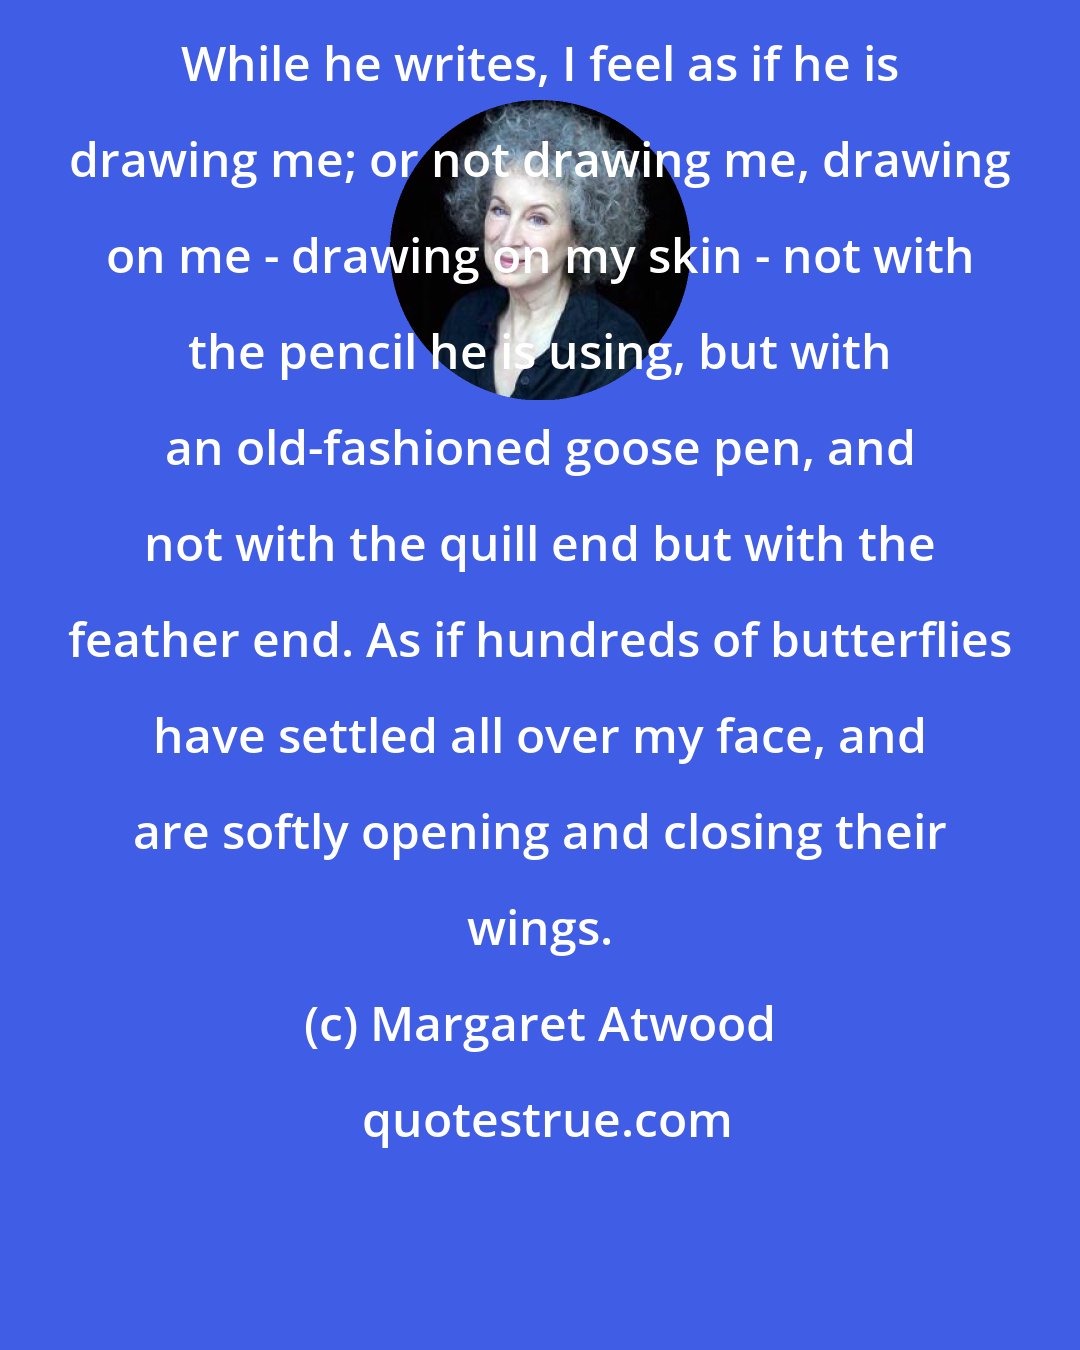 Margaret Atwood: While he writes, I feel as if he is drawing me; or not drawing me, drawing on me - drawing on my skin - not with the pencil he is using, but with an old-fashioned goose pen, and not with the quill end but with the feather end. As if hundreds of butterflies have settled all over my face, and are softly opening and closing their wings.